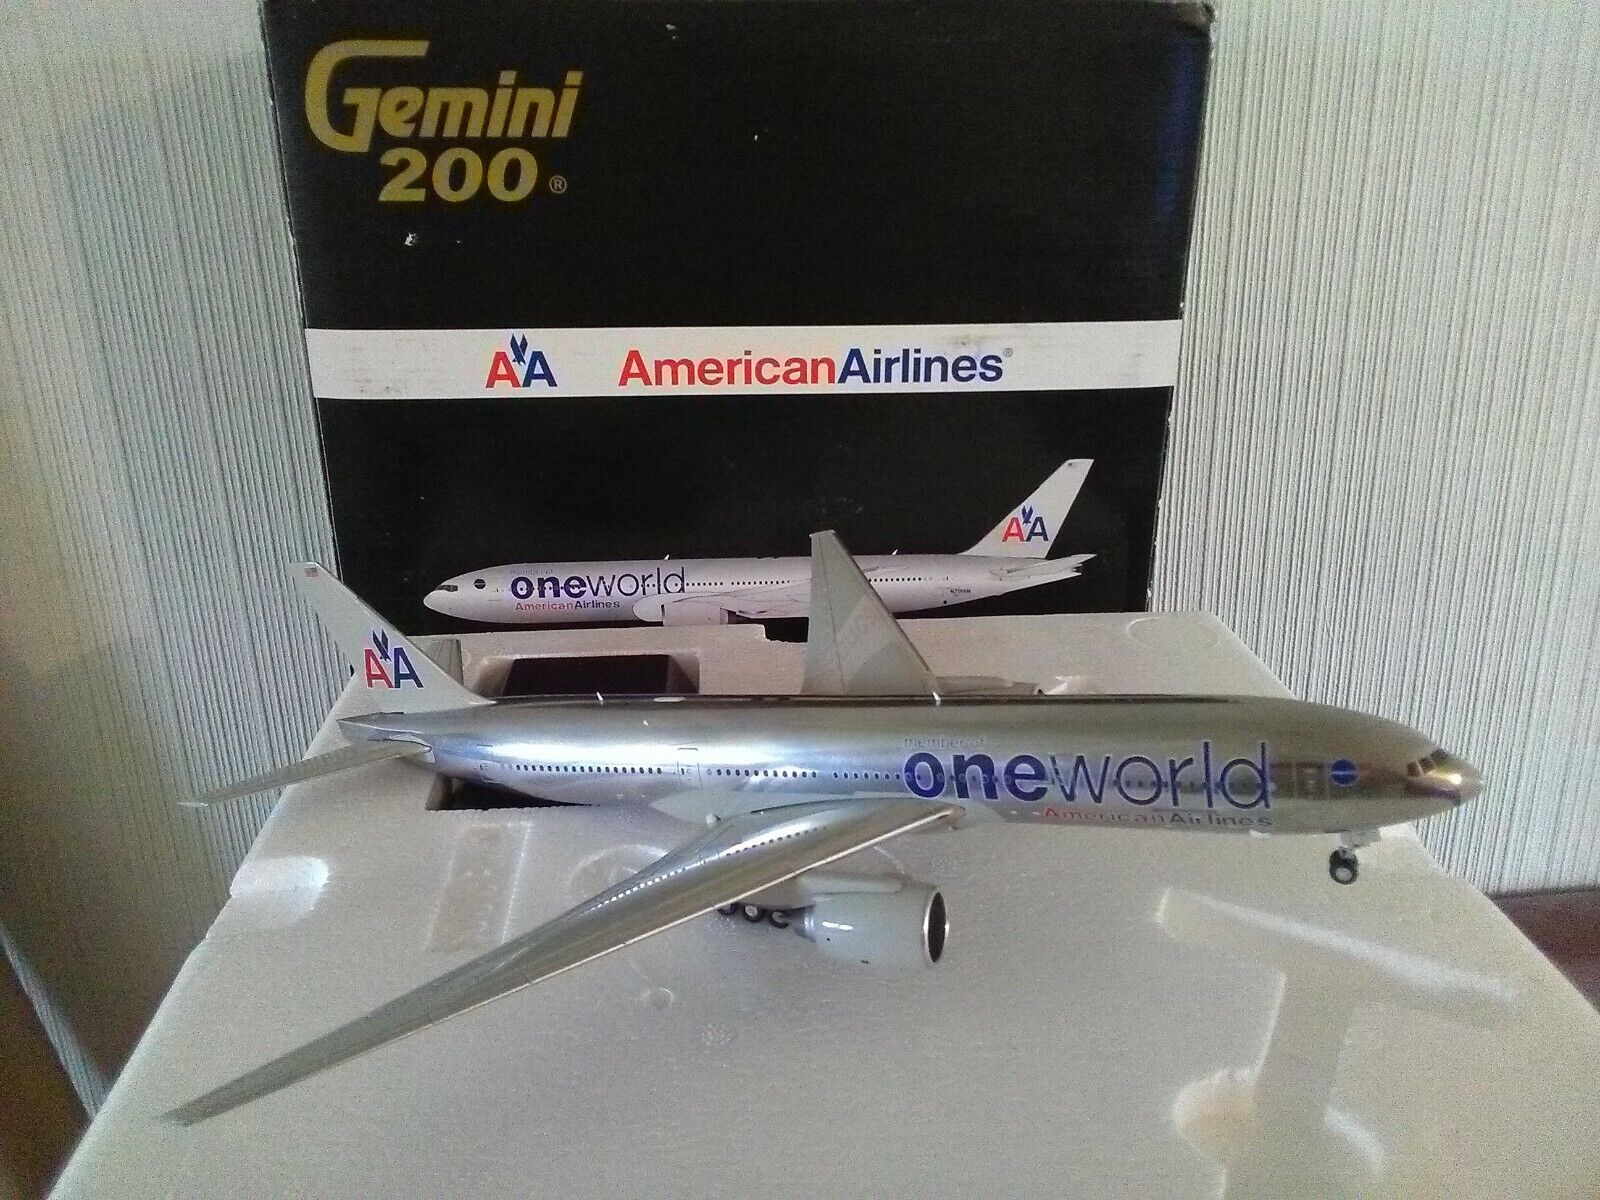 American Airlines Oneworld  Boeing 777-200ER Gemini200 1:200 BOXED G2AAL242.